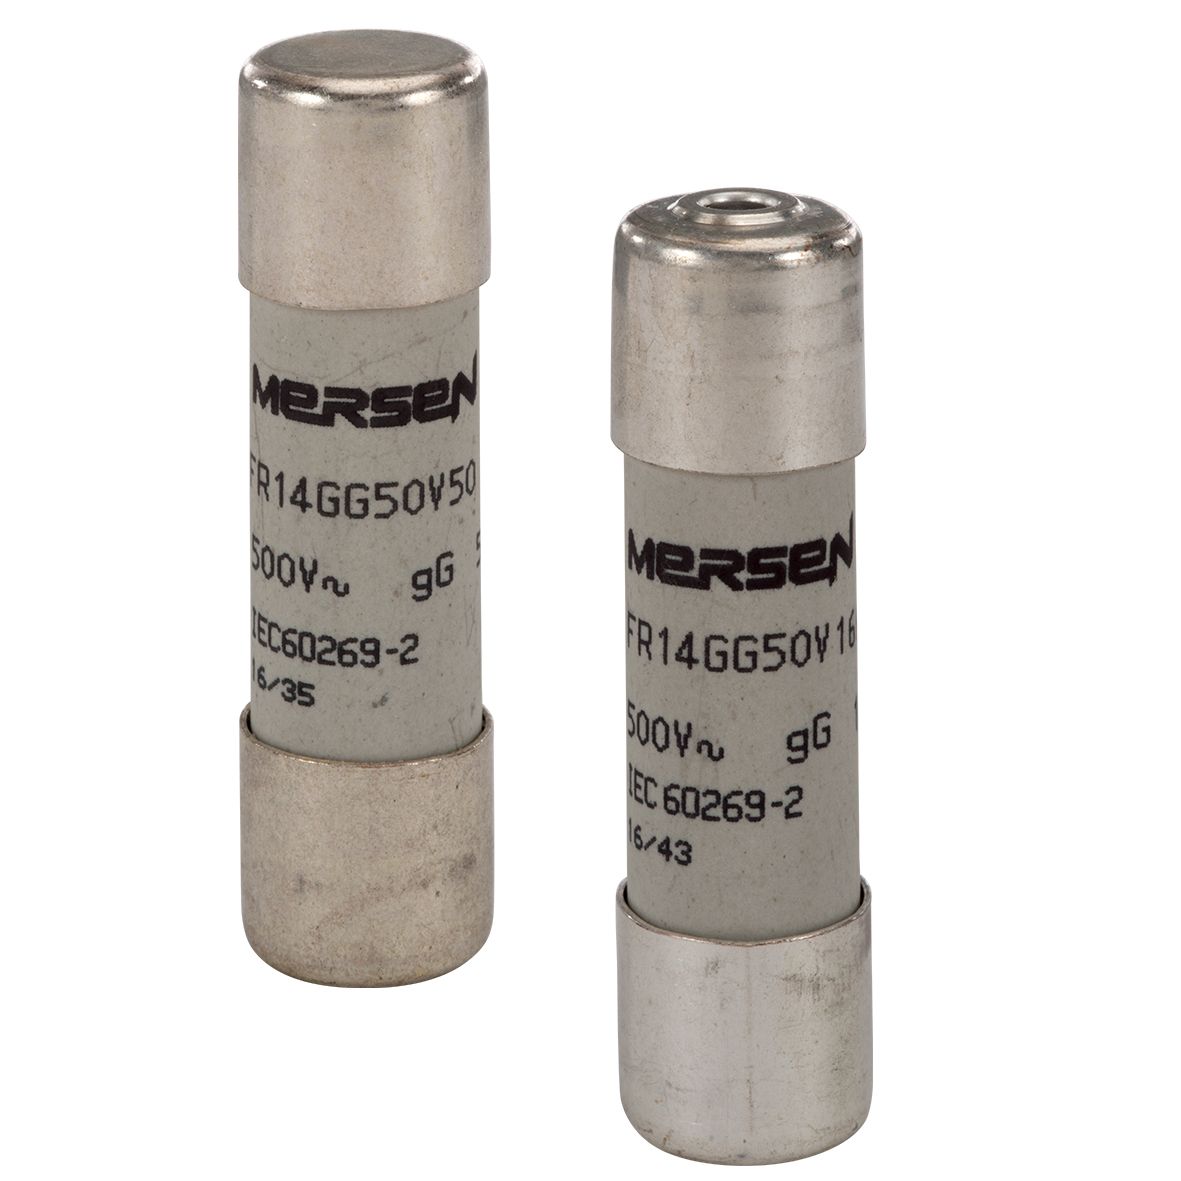 Z212588 - Cylindrical fuse-link gG 690VAC 14.3x51, 20A